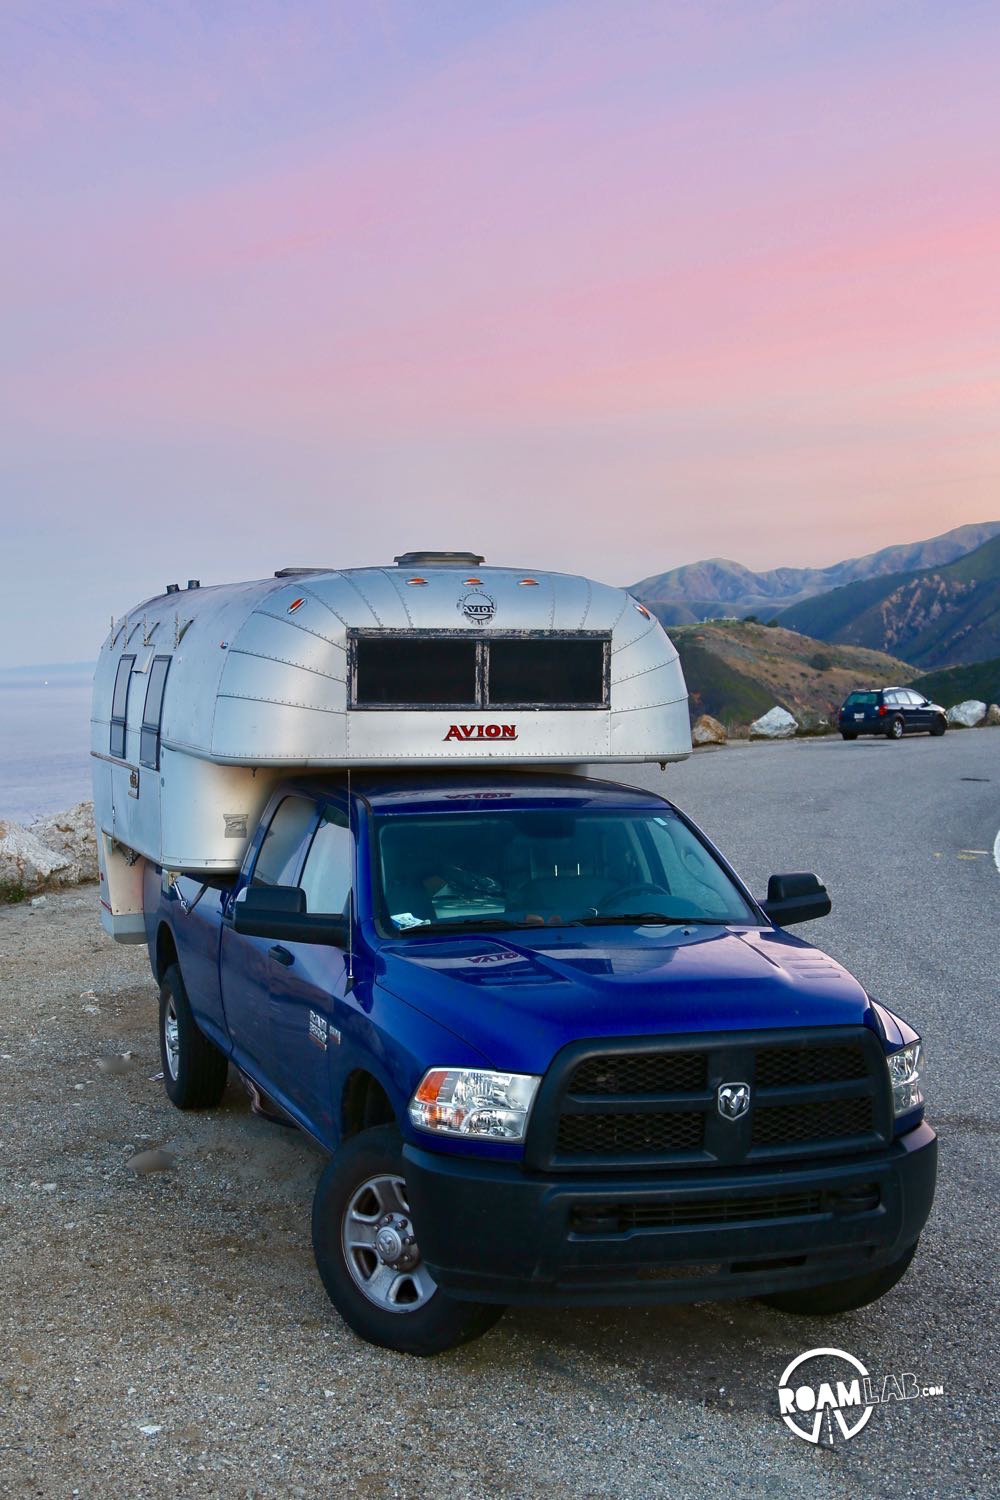 1970 Avion C11 truck camper parked by the ocean at sunrise.